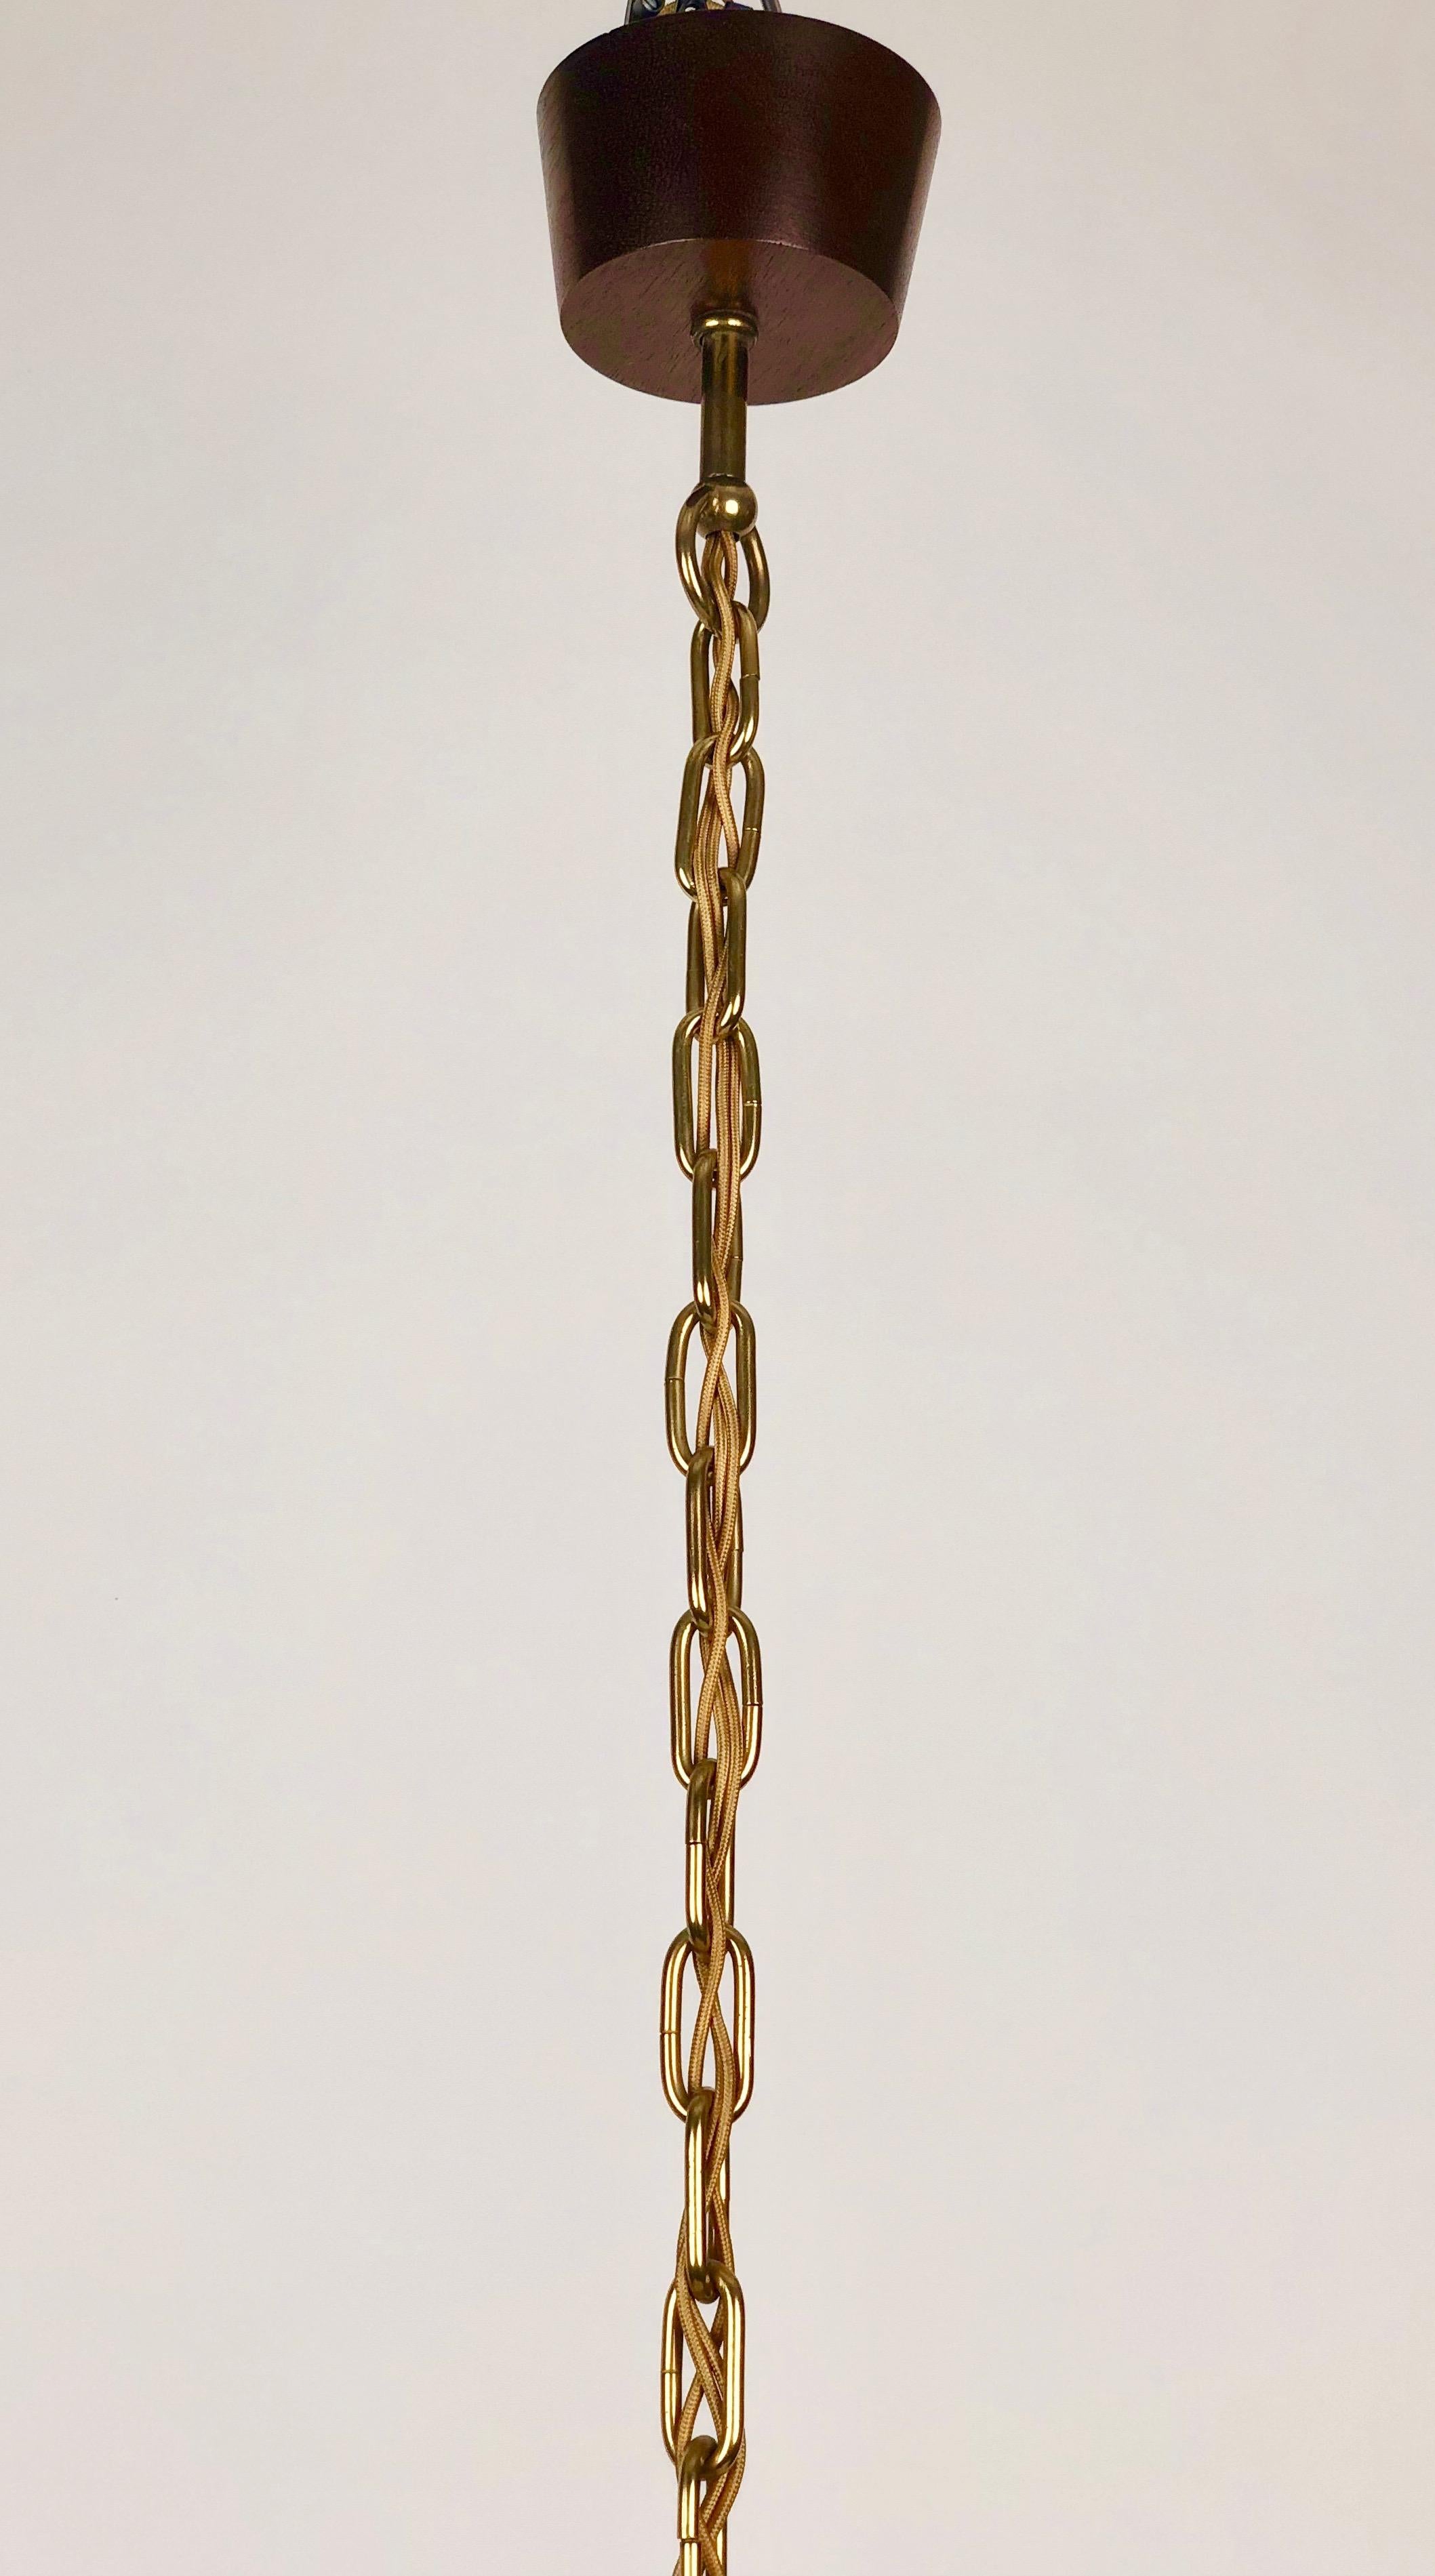 Five Arms Chandelier in Teak Wood and Brass with Cane Shades, 1960, Austria For Sale 2